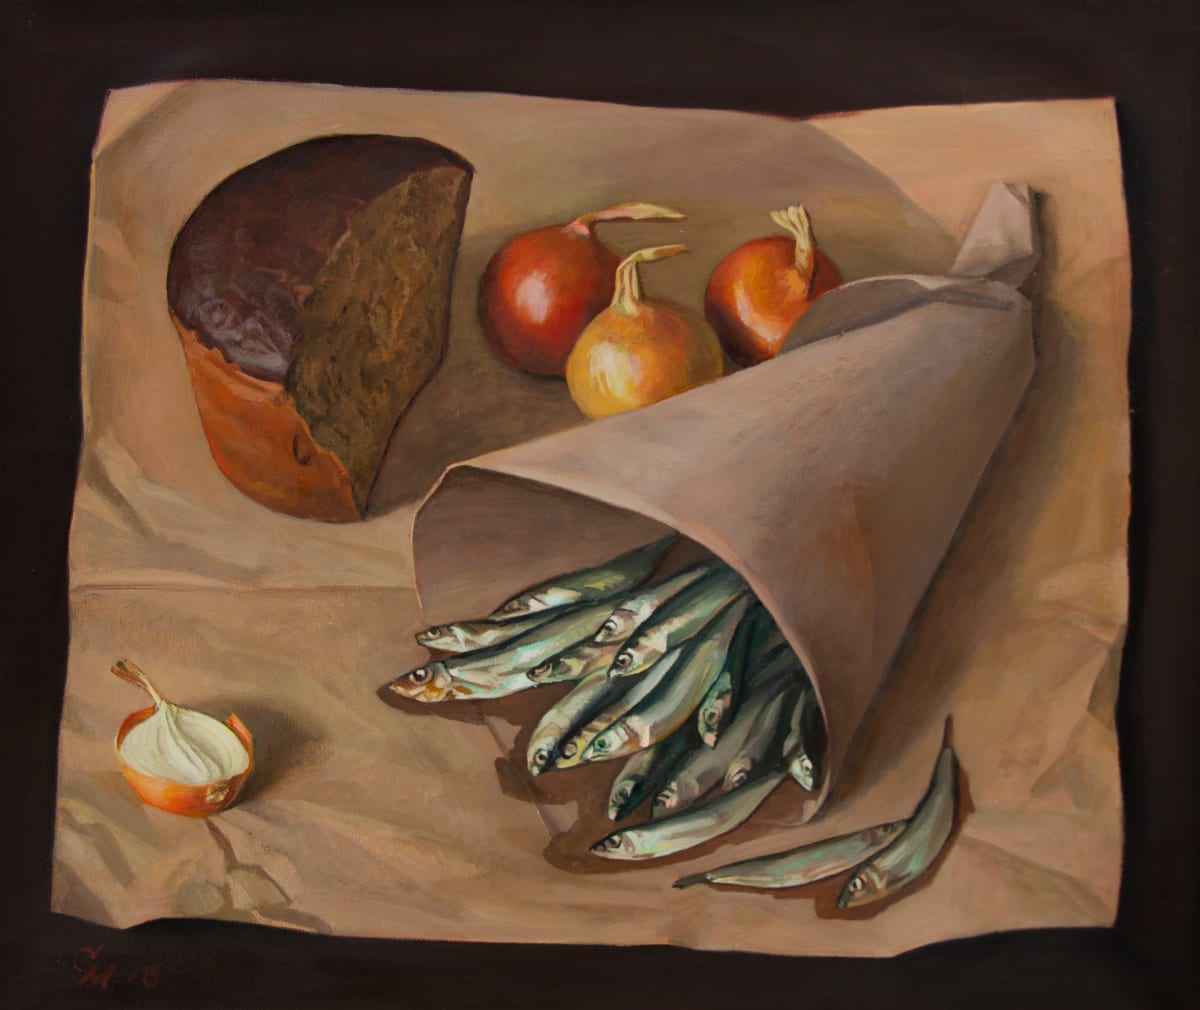 Bread and Sprats by Mikhail Salmov 